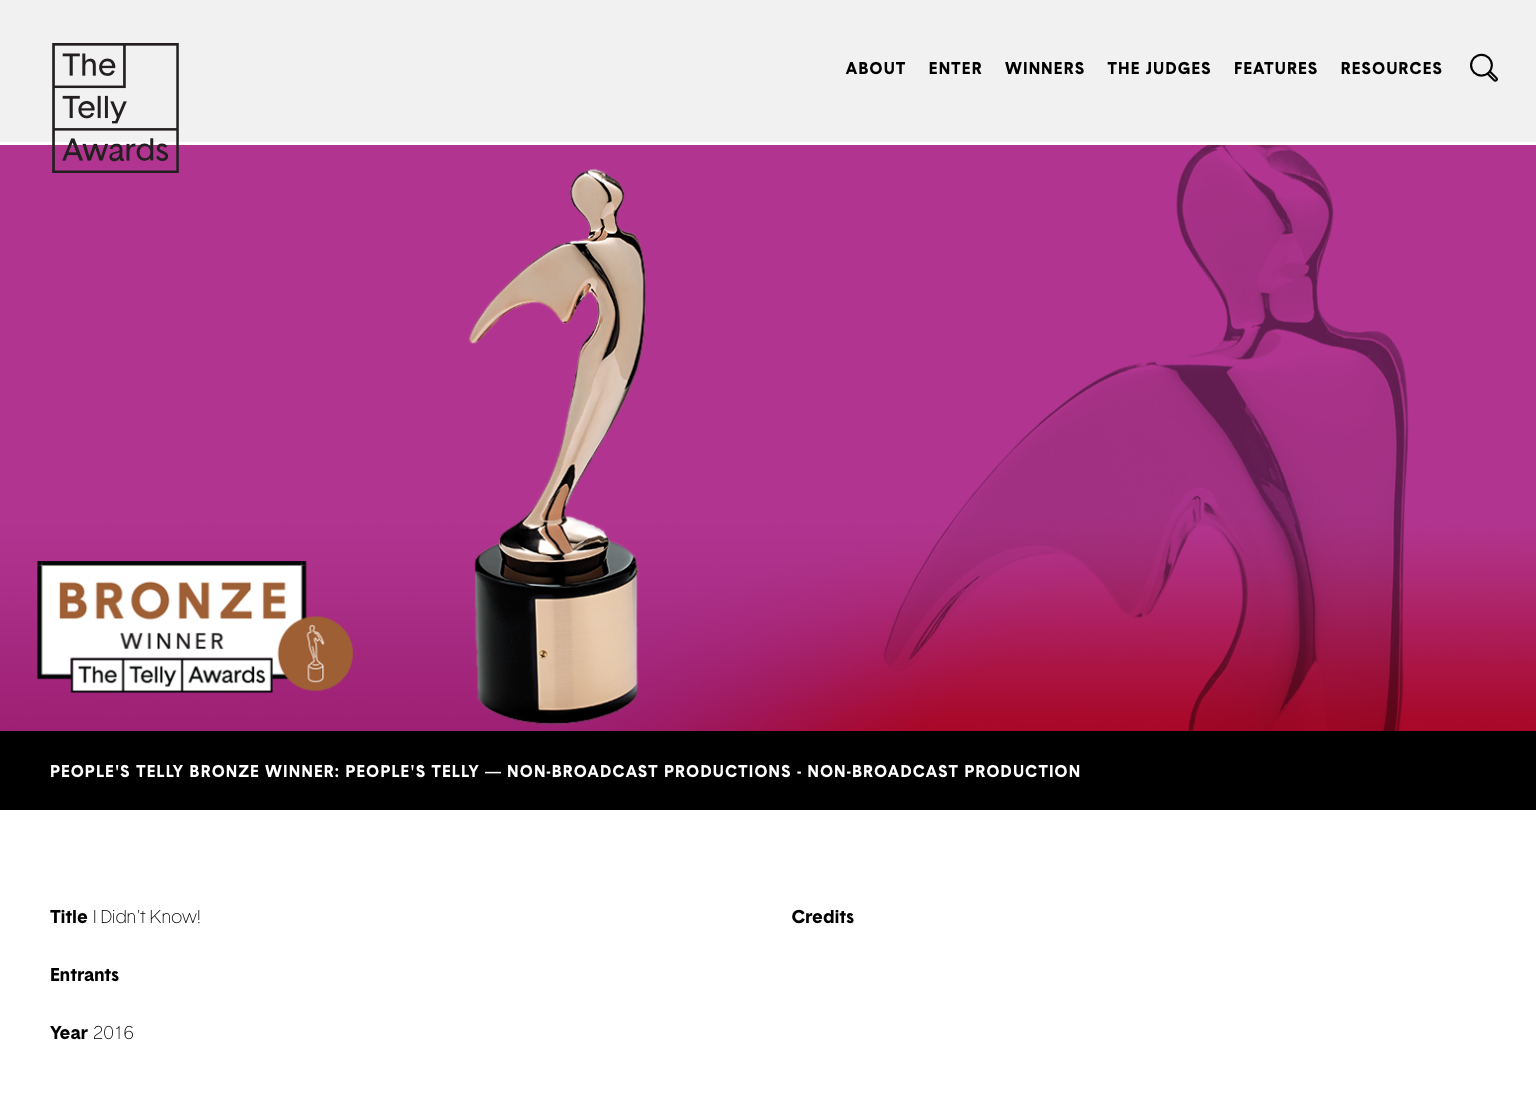 "I Didn't Know!" was a Bronze People's Telly Award Winner